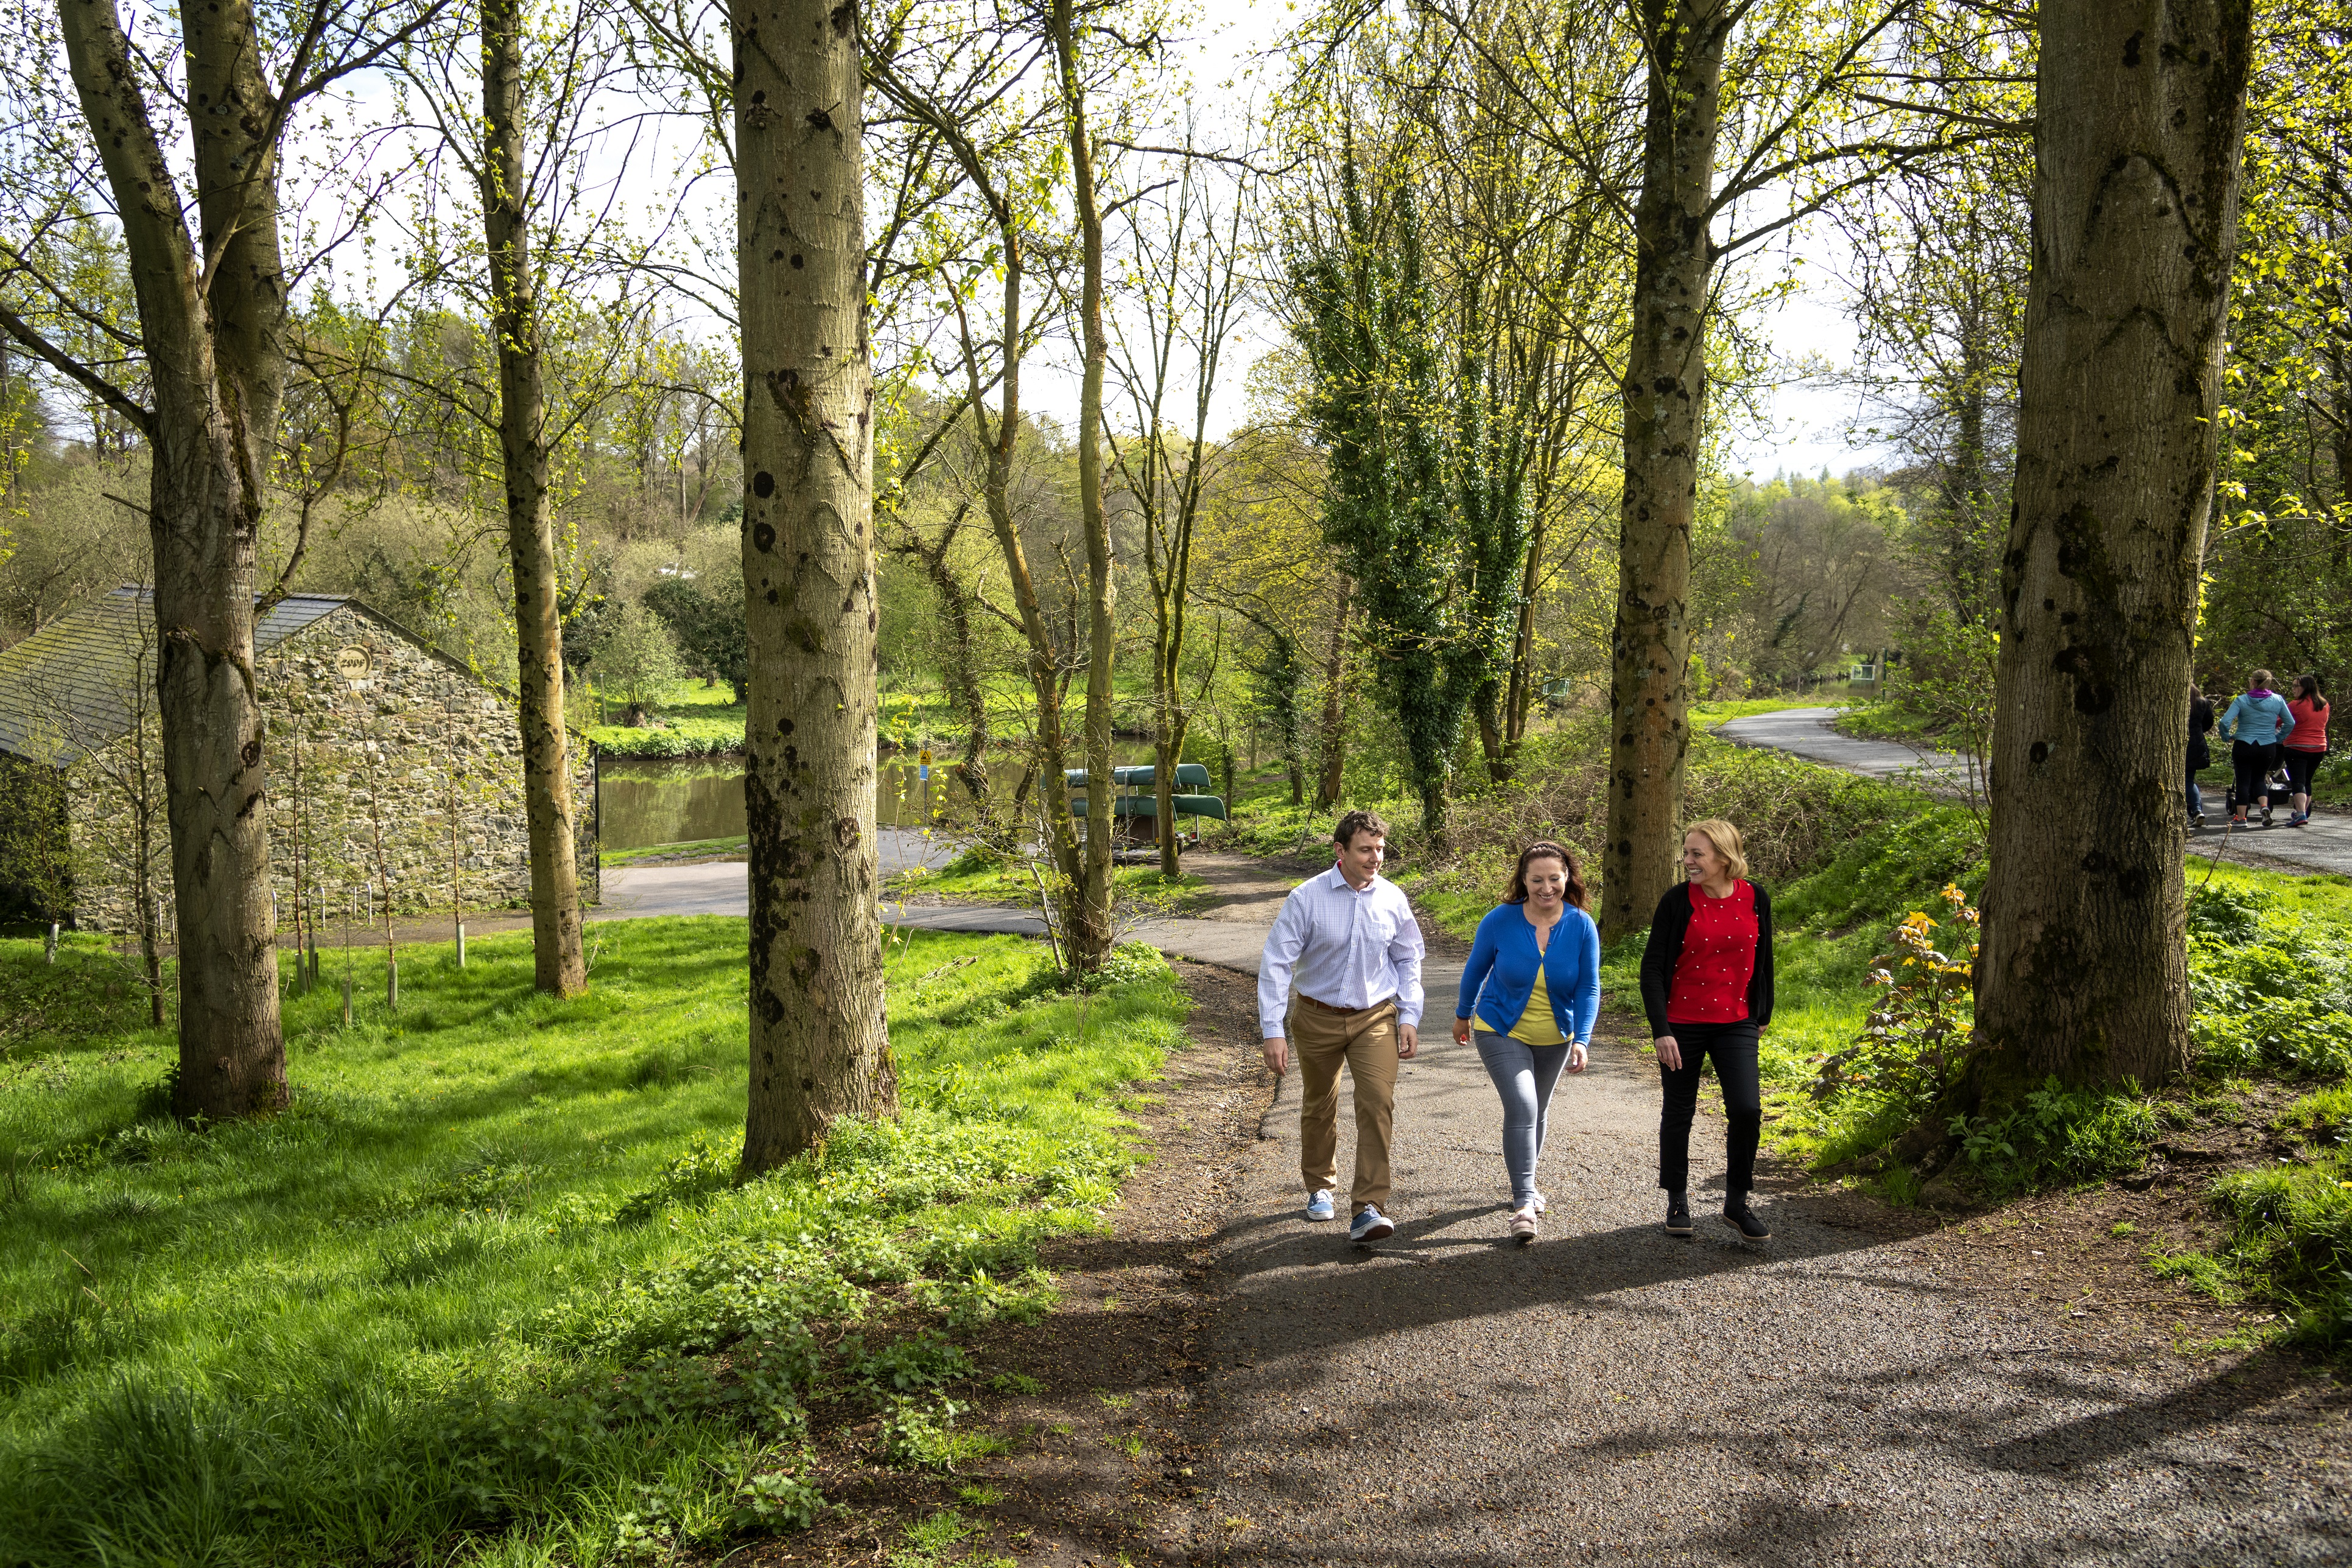 A man and two woman walking along path with river in background